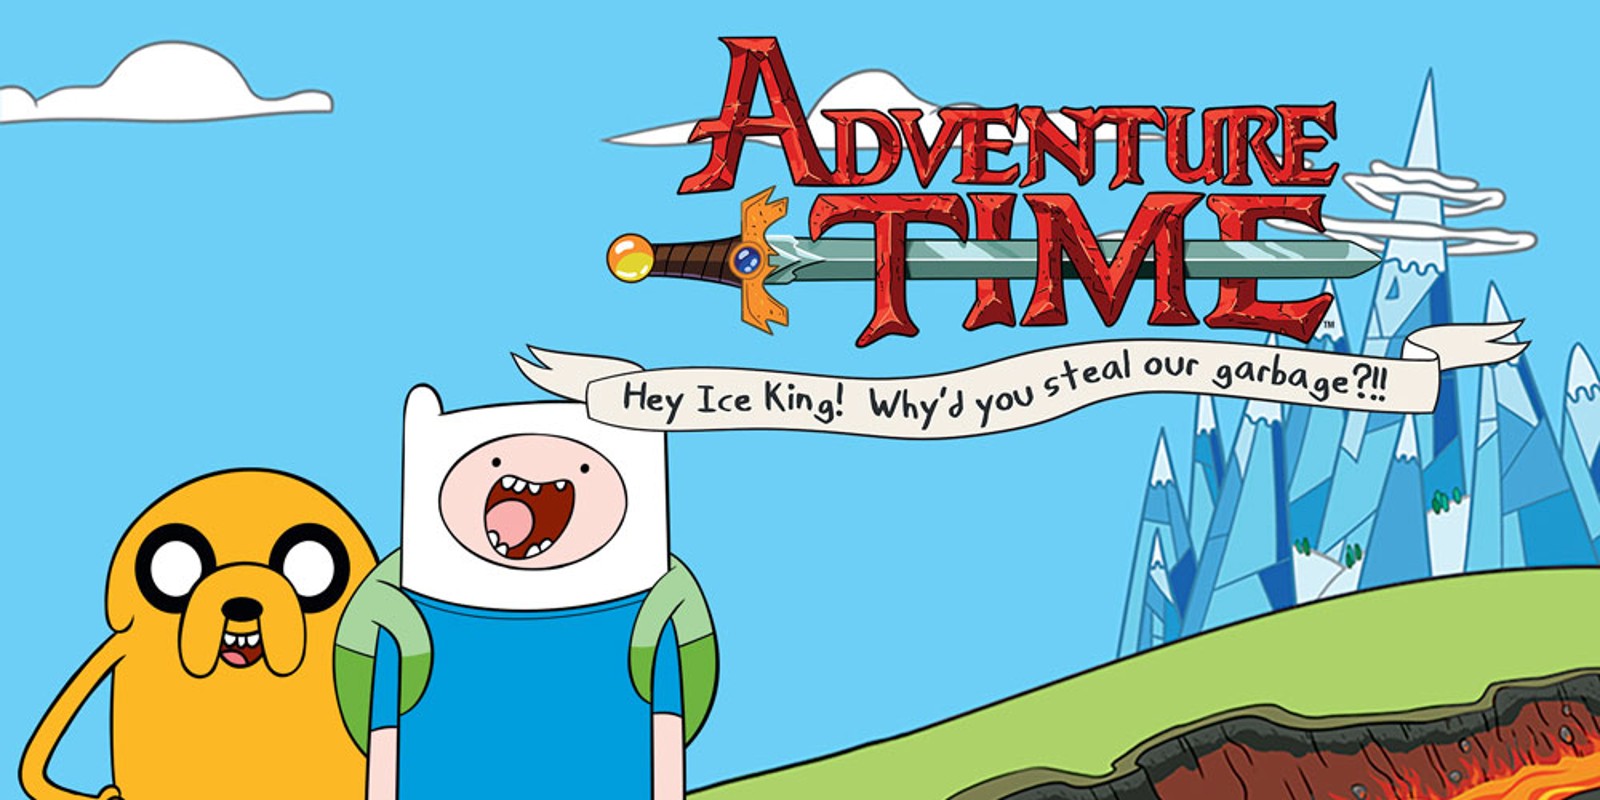 Adventure Time: Hey Ice King! Why'd you steal our garbage?!!